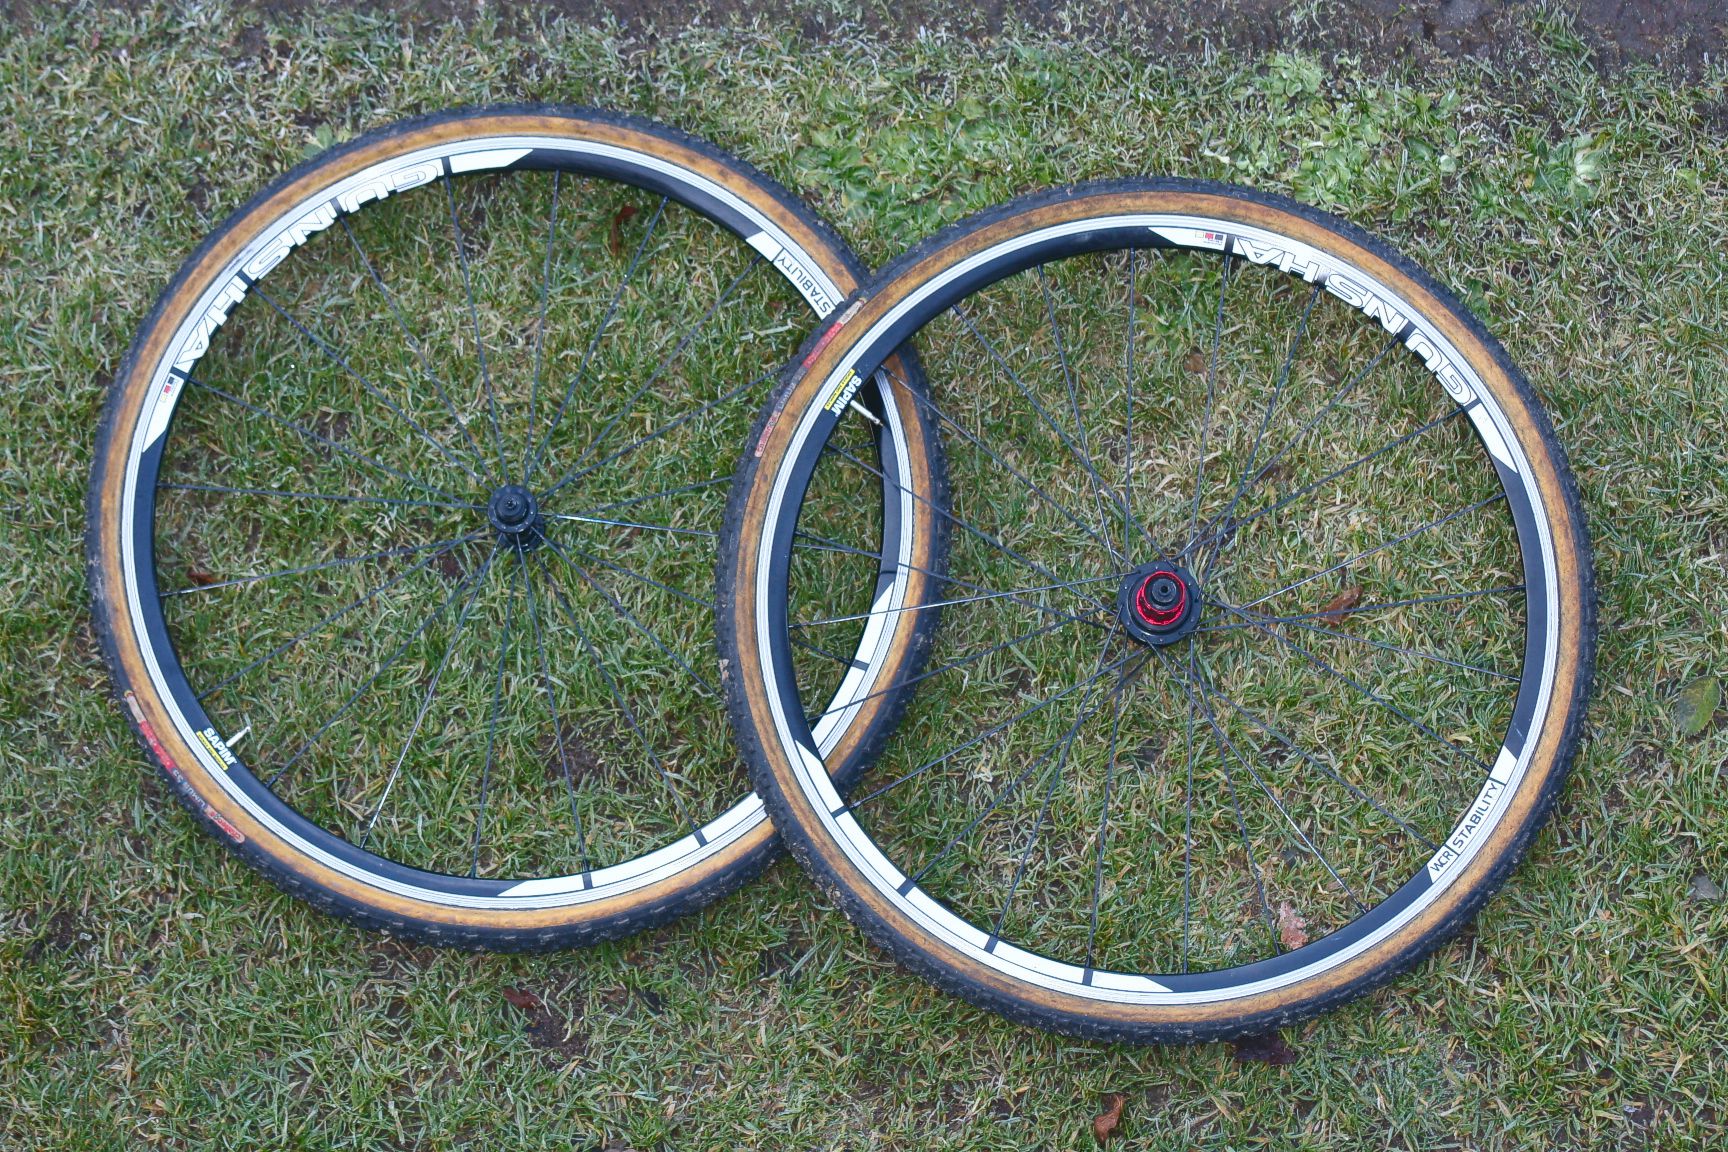 WCR Alloy Stability Tubular incl. Challenge Limus Reifen.